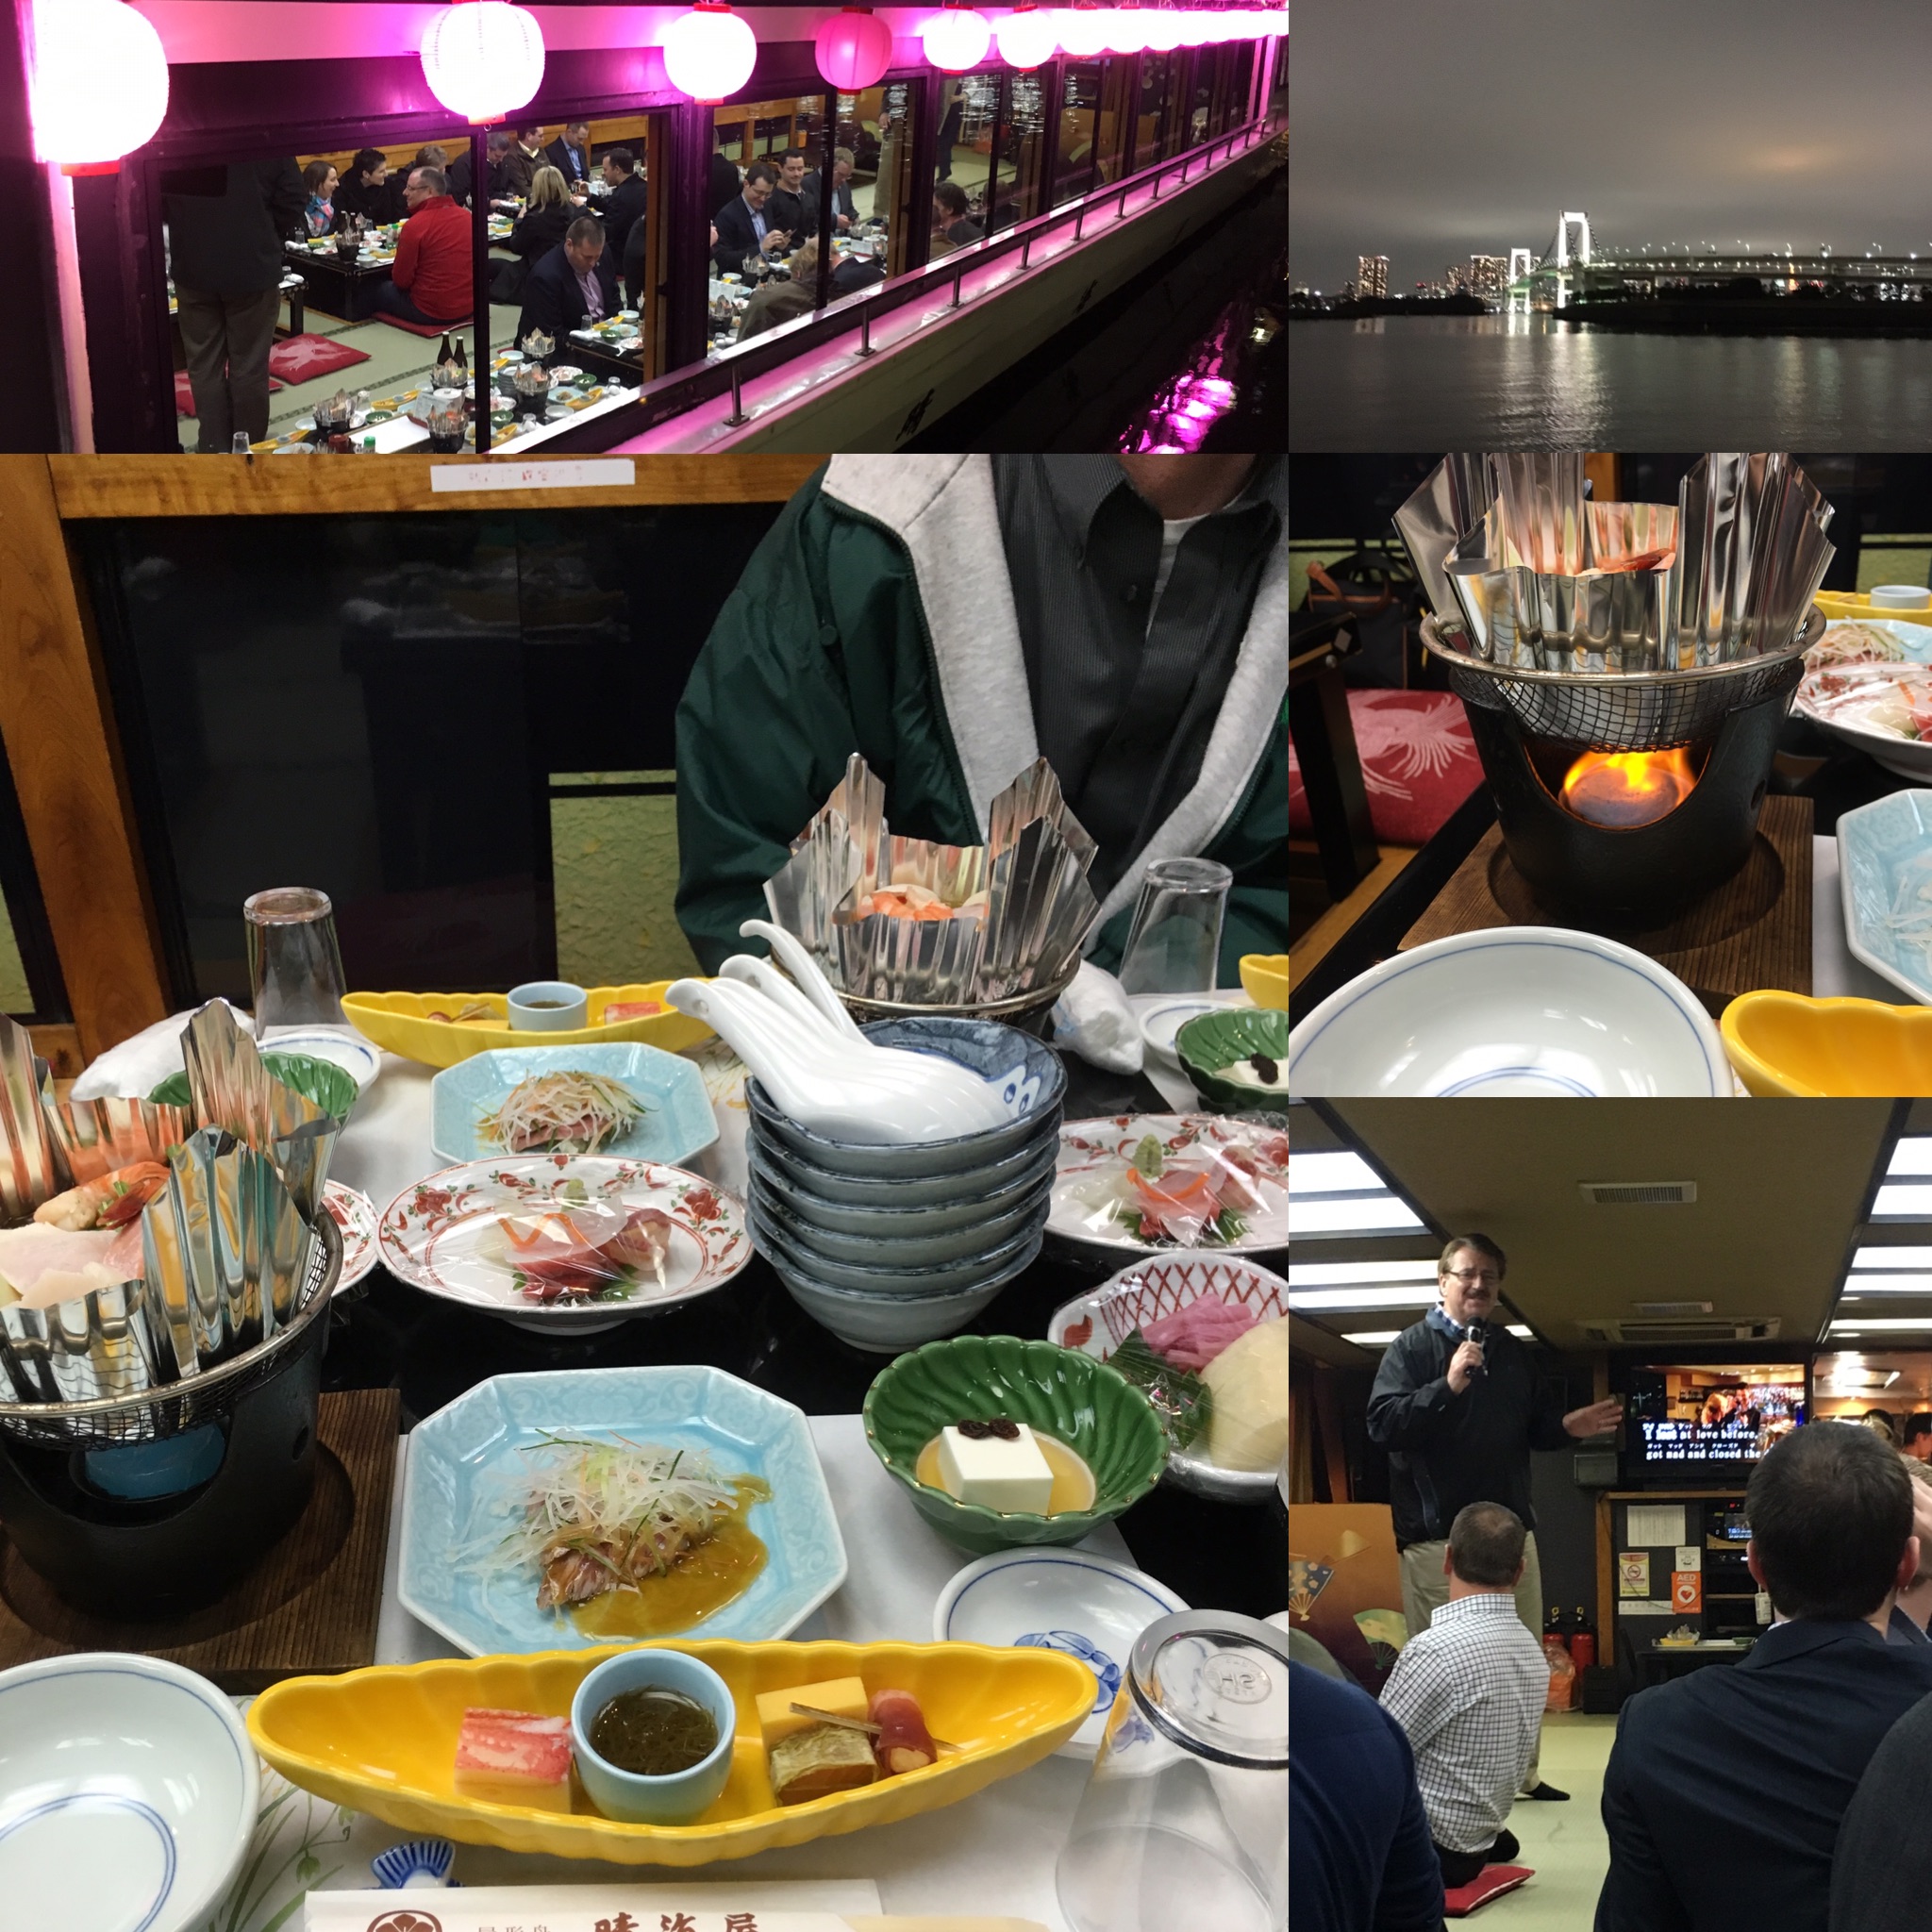 Images from the Yakatabune dinner cruise - complete with many options of Japanese cuisine and karaoke!